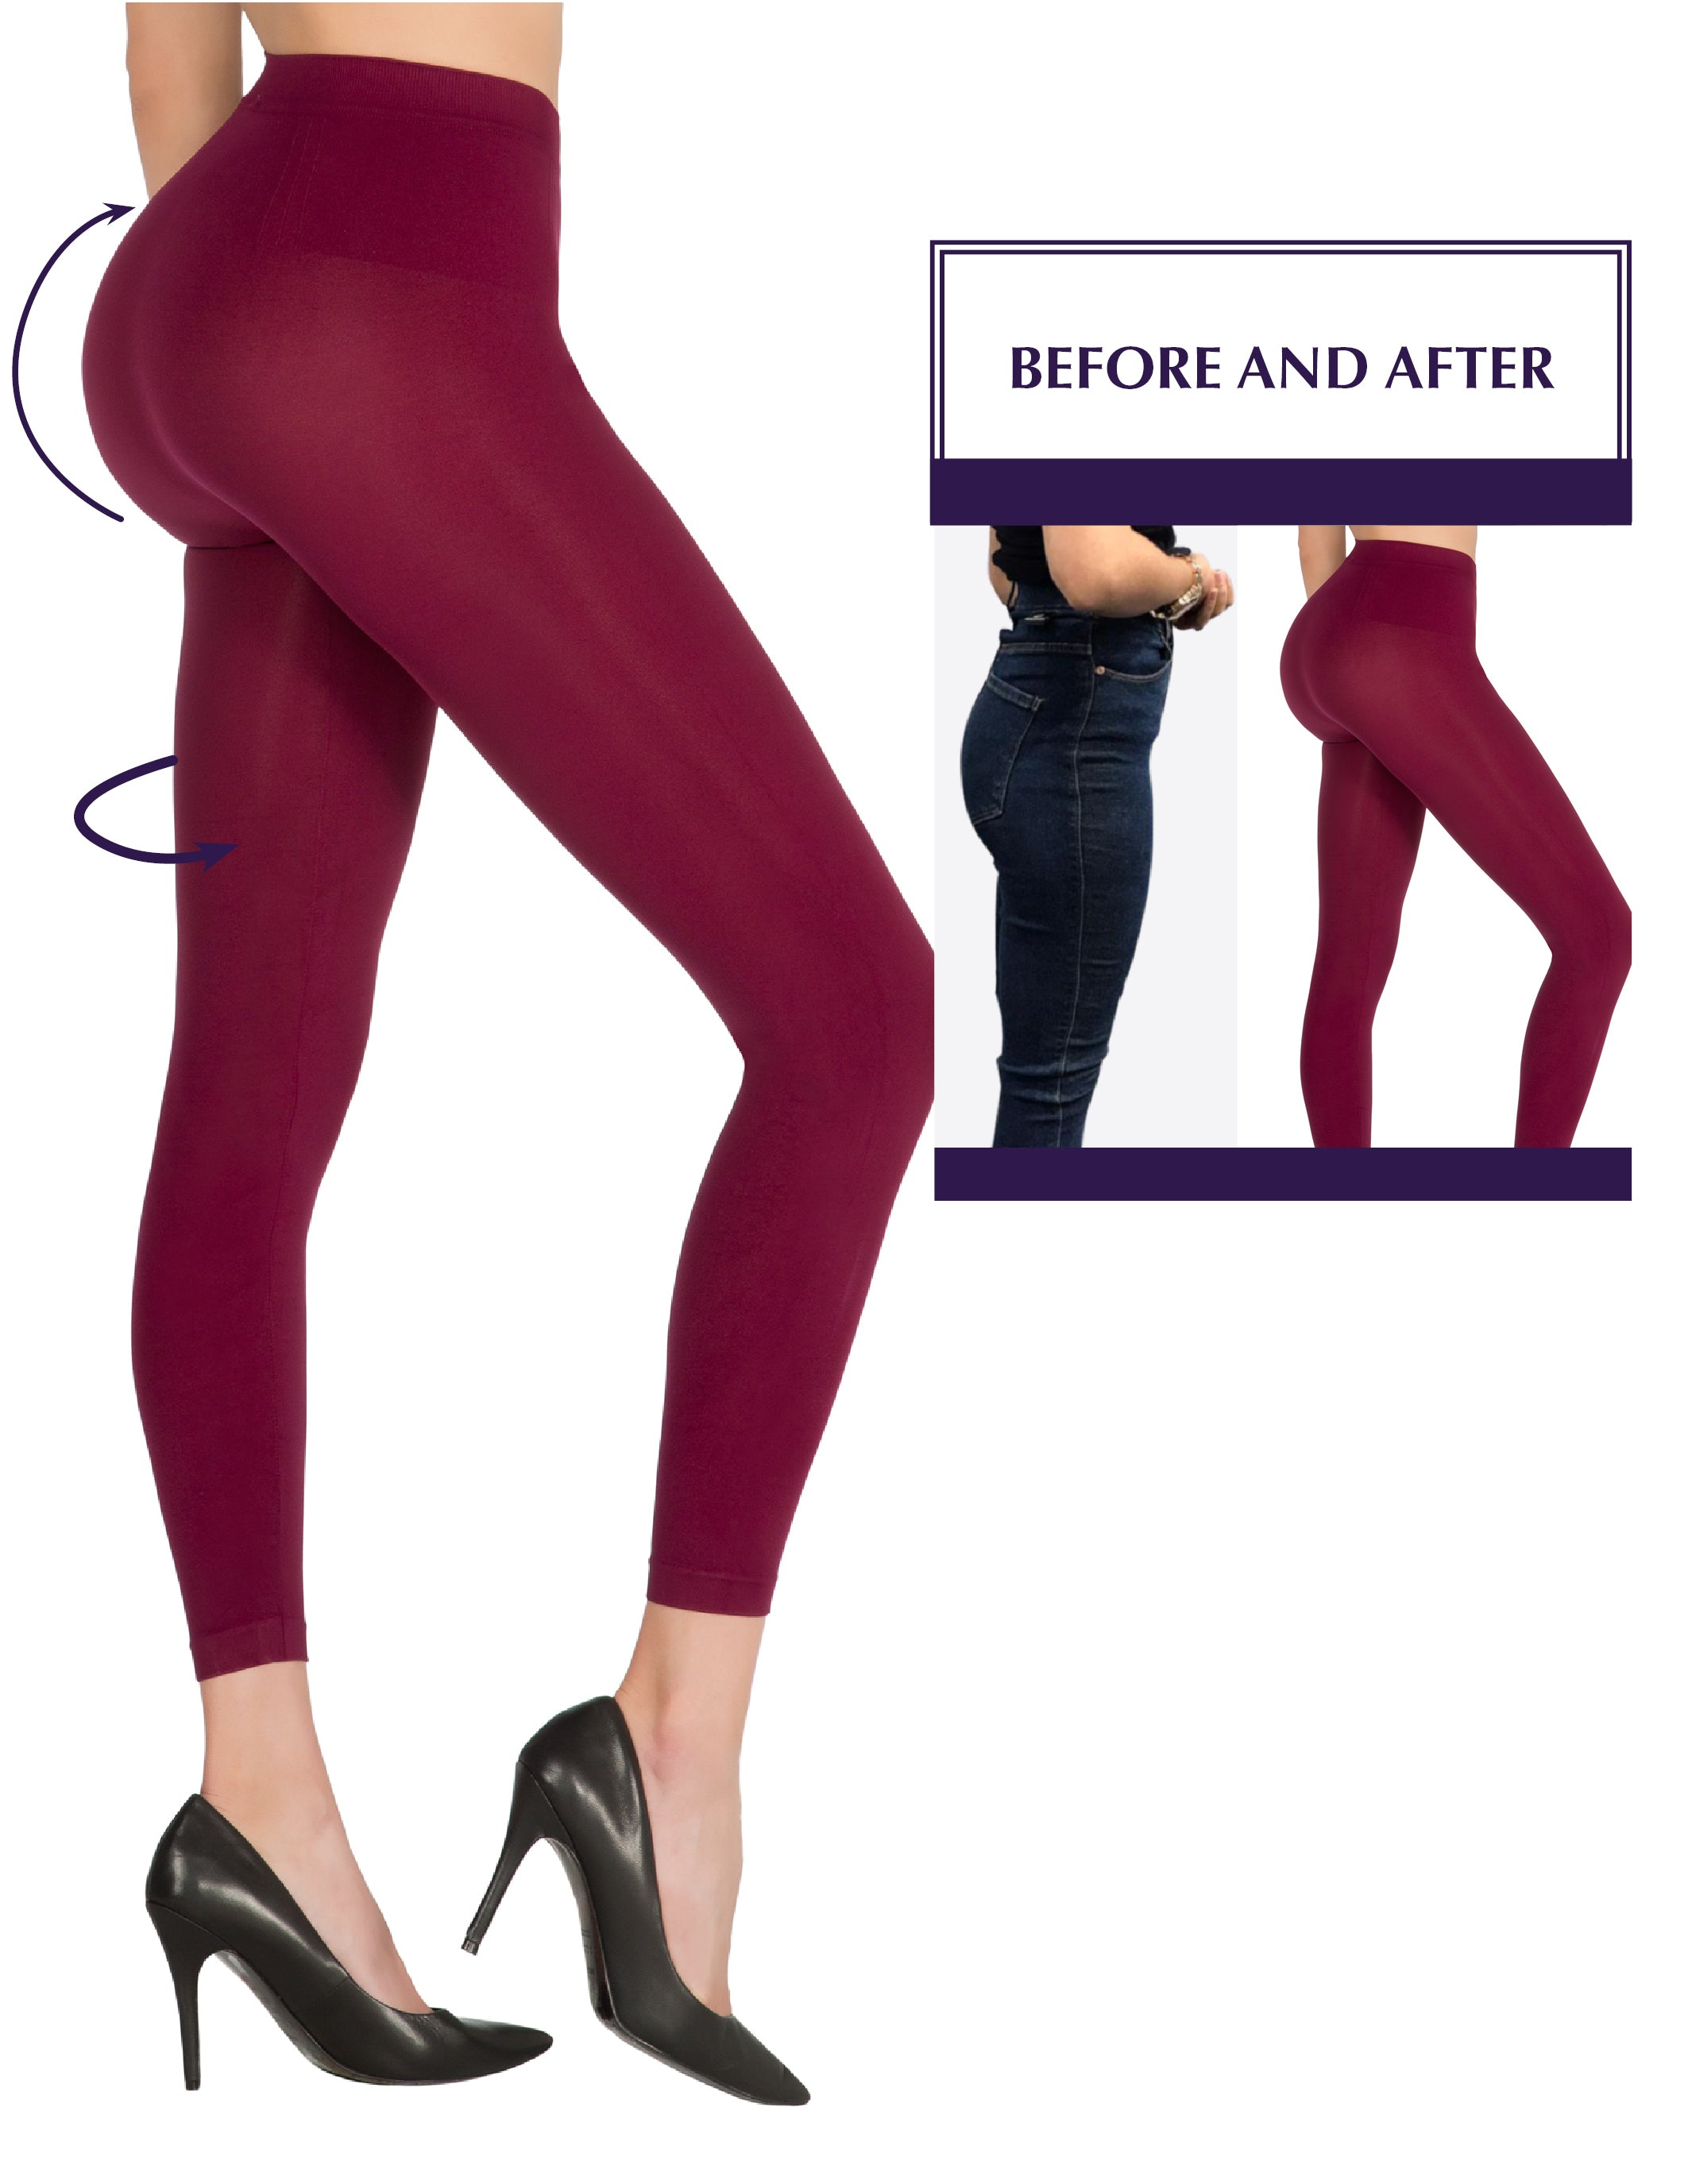 SLIMMING HIGH WAISTED CONTROL LEGGINGS EXTRA STRONG FIRM TUMMY SUPPORT,8-30  | eBay